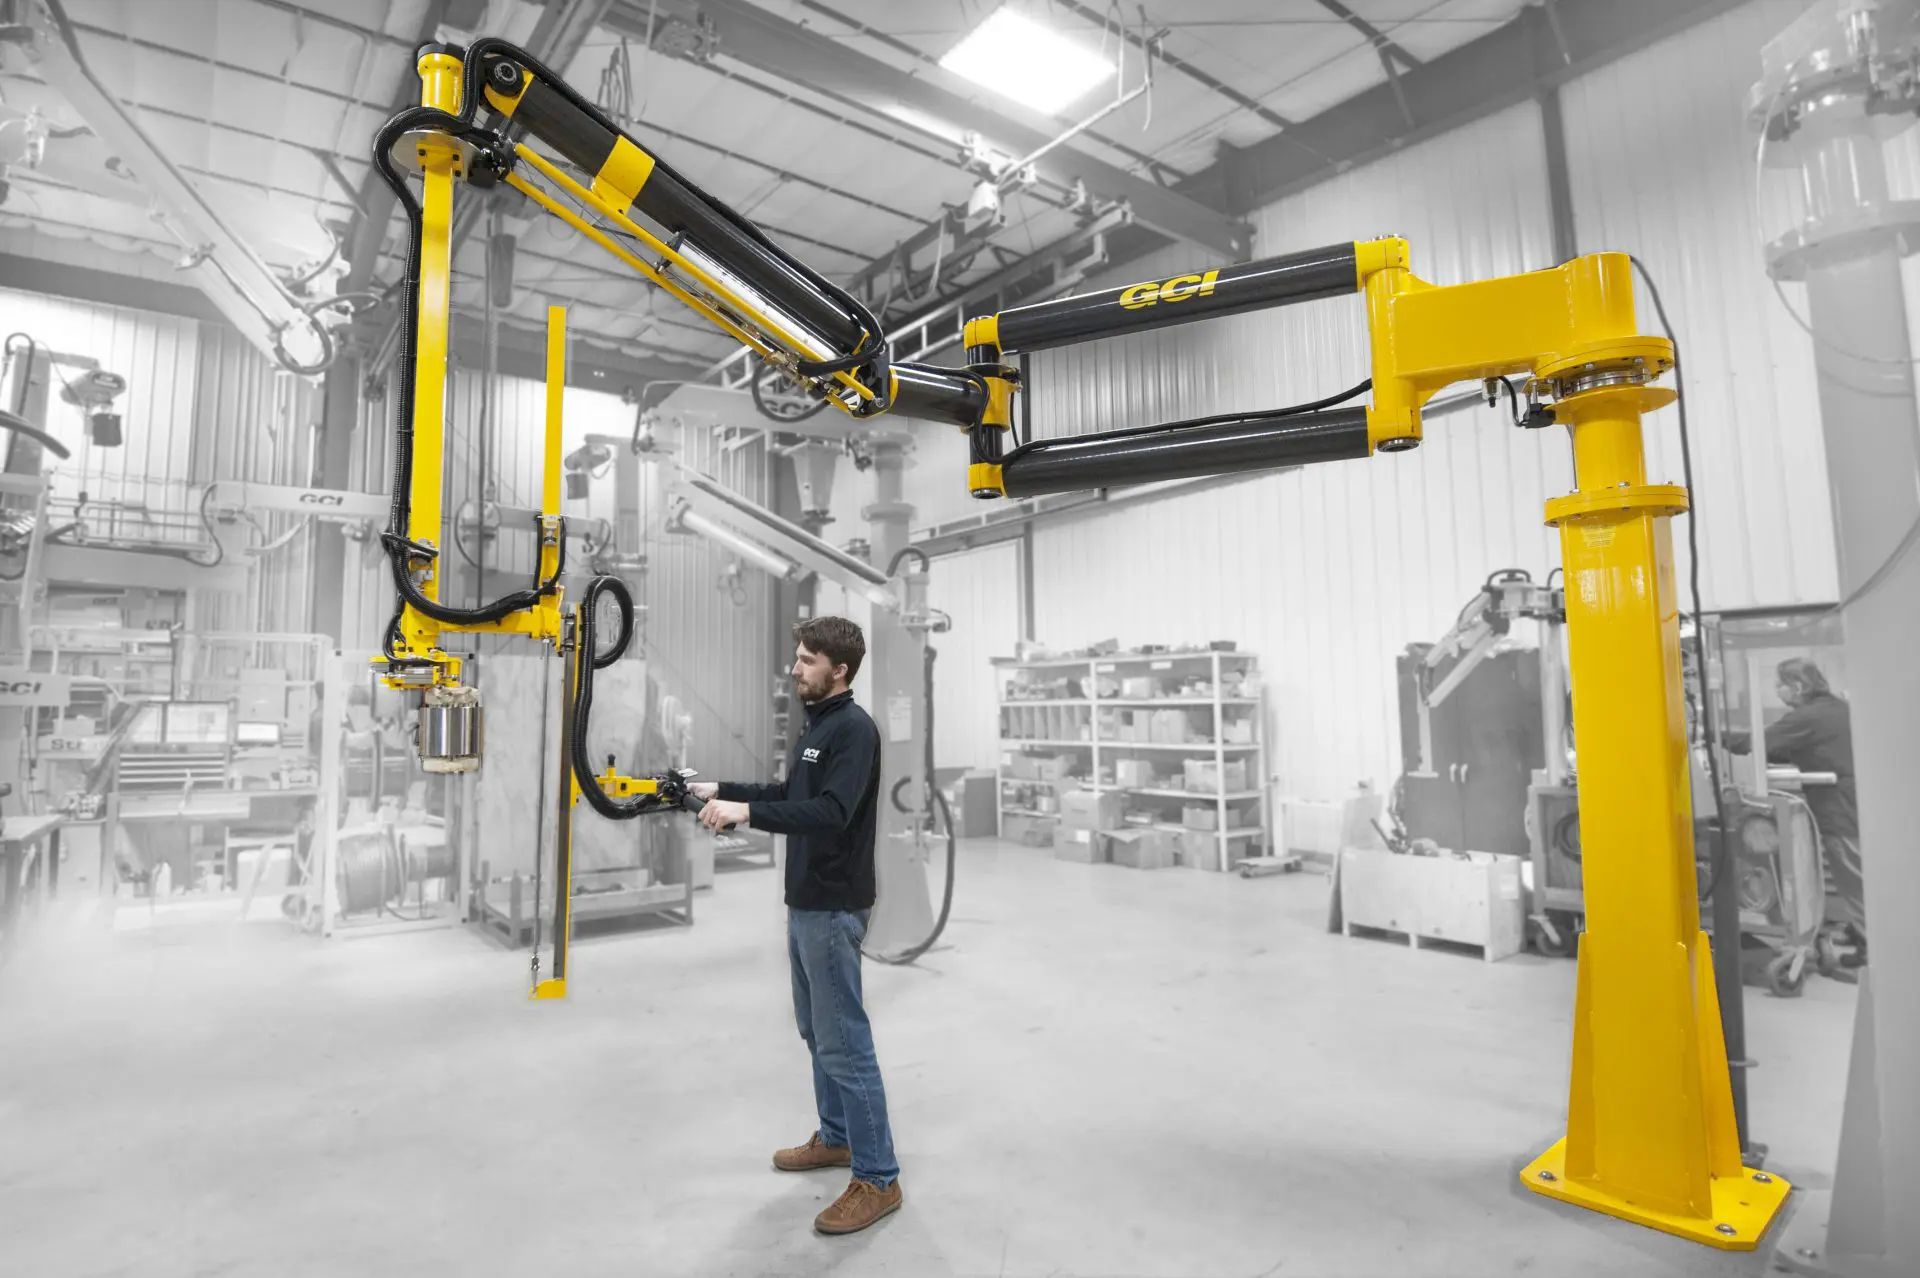 Custom engineered torque reaction arm for improved operator safety and ergonomics